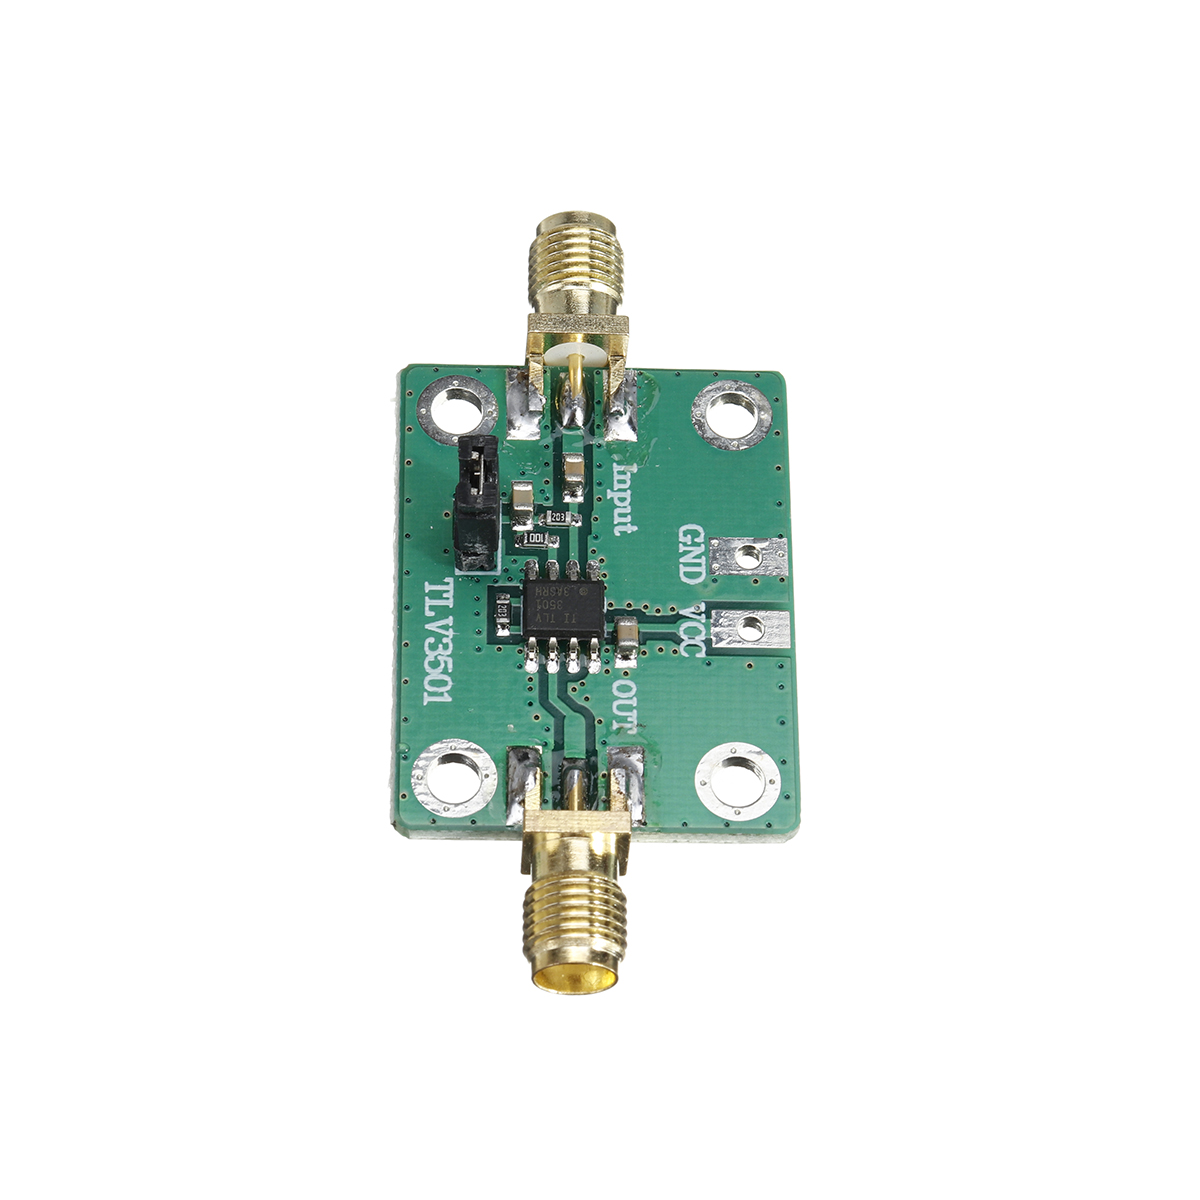 20pcs-TLV3501-High-speed-Waveform-Comparator-Frequency-Meter-Tester-Front-end-Shaping-Module-1689249